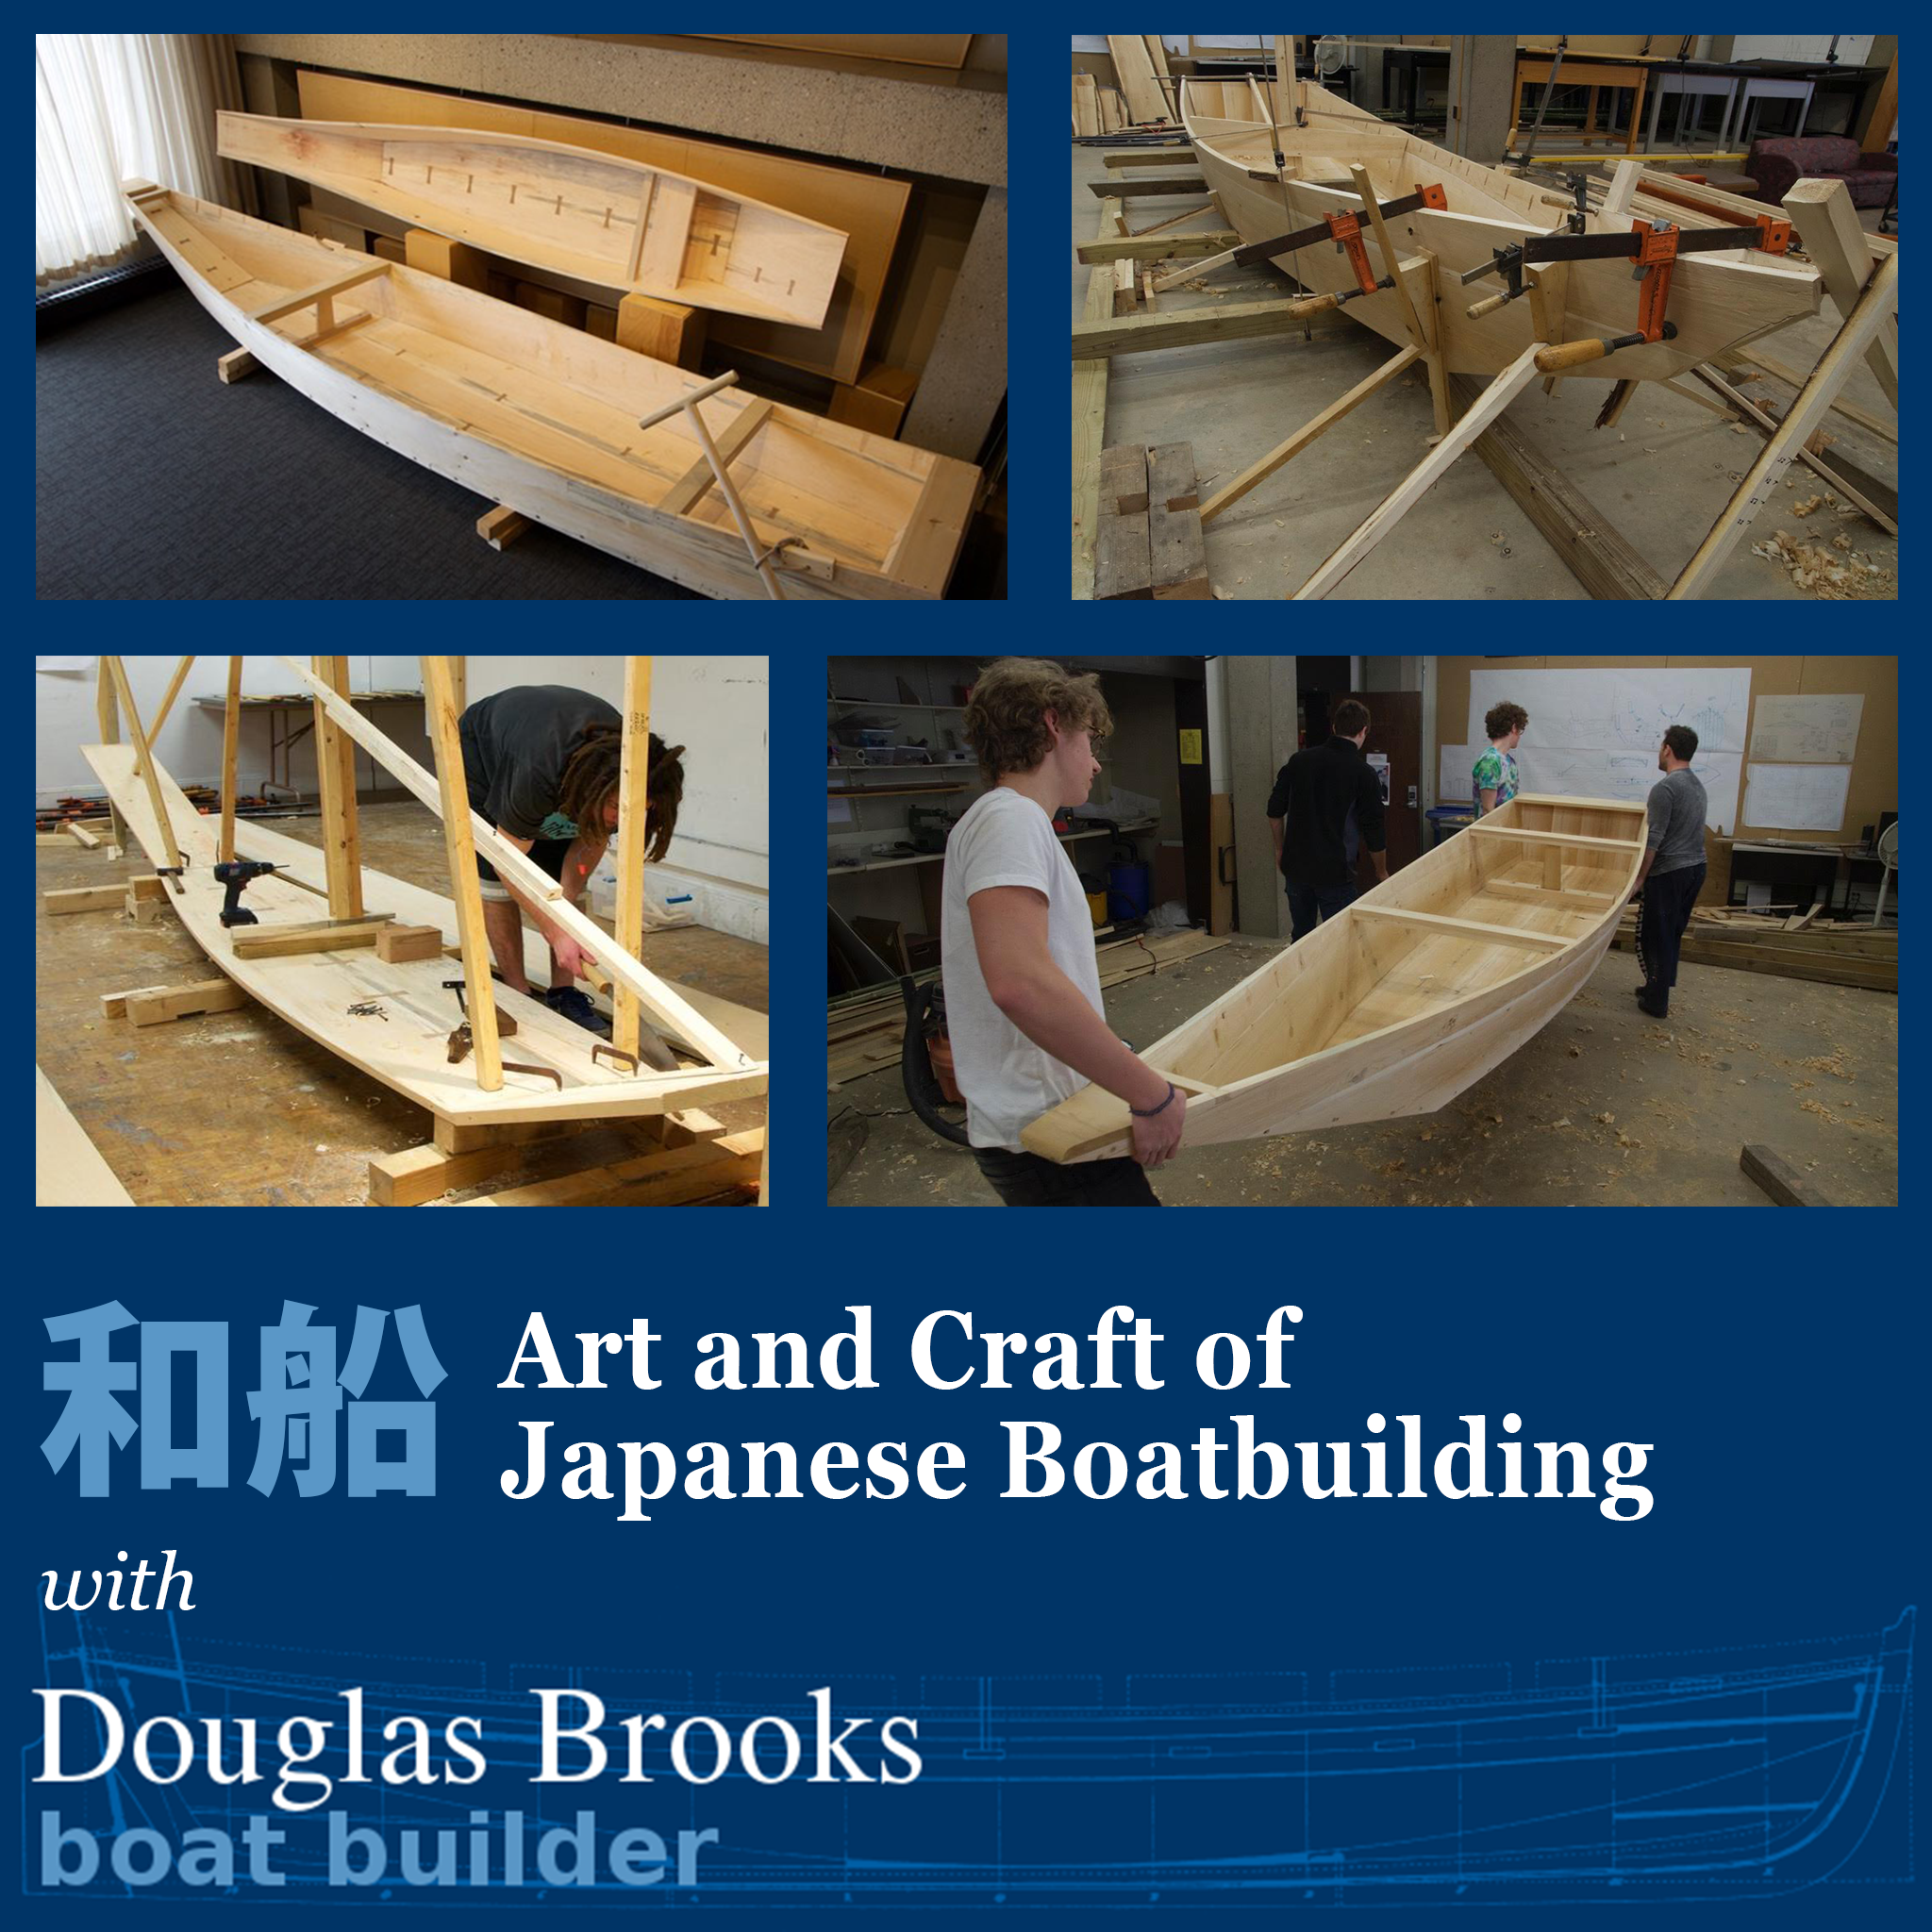 Poster for The Art of Japanese Boatbuilding, blue background with images of a traditional Japanese boat being built